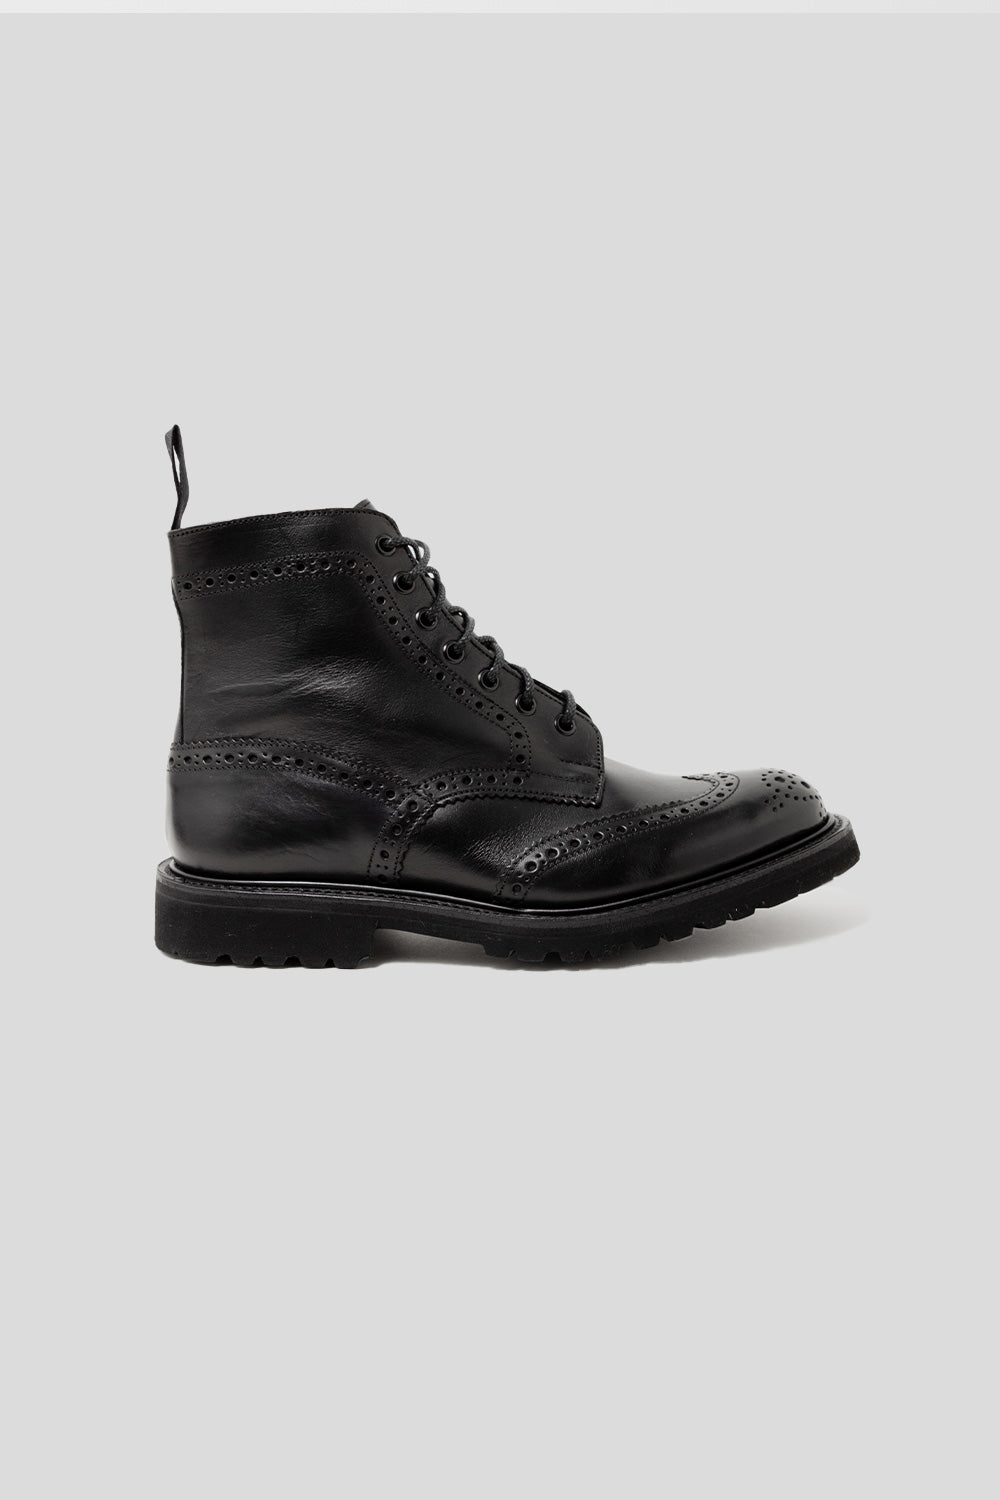 Tricker's Stow Vi-Lite Country Boot in Black Olivvia Classic